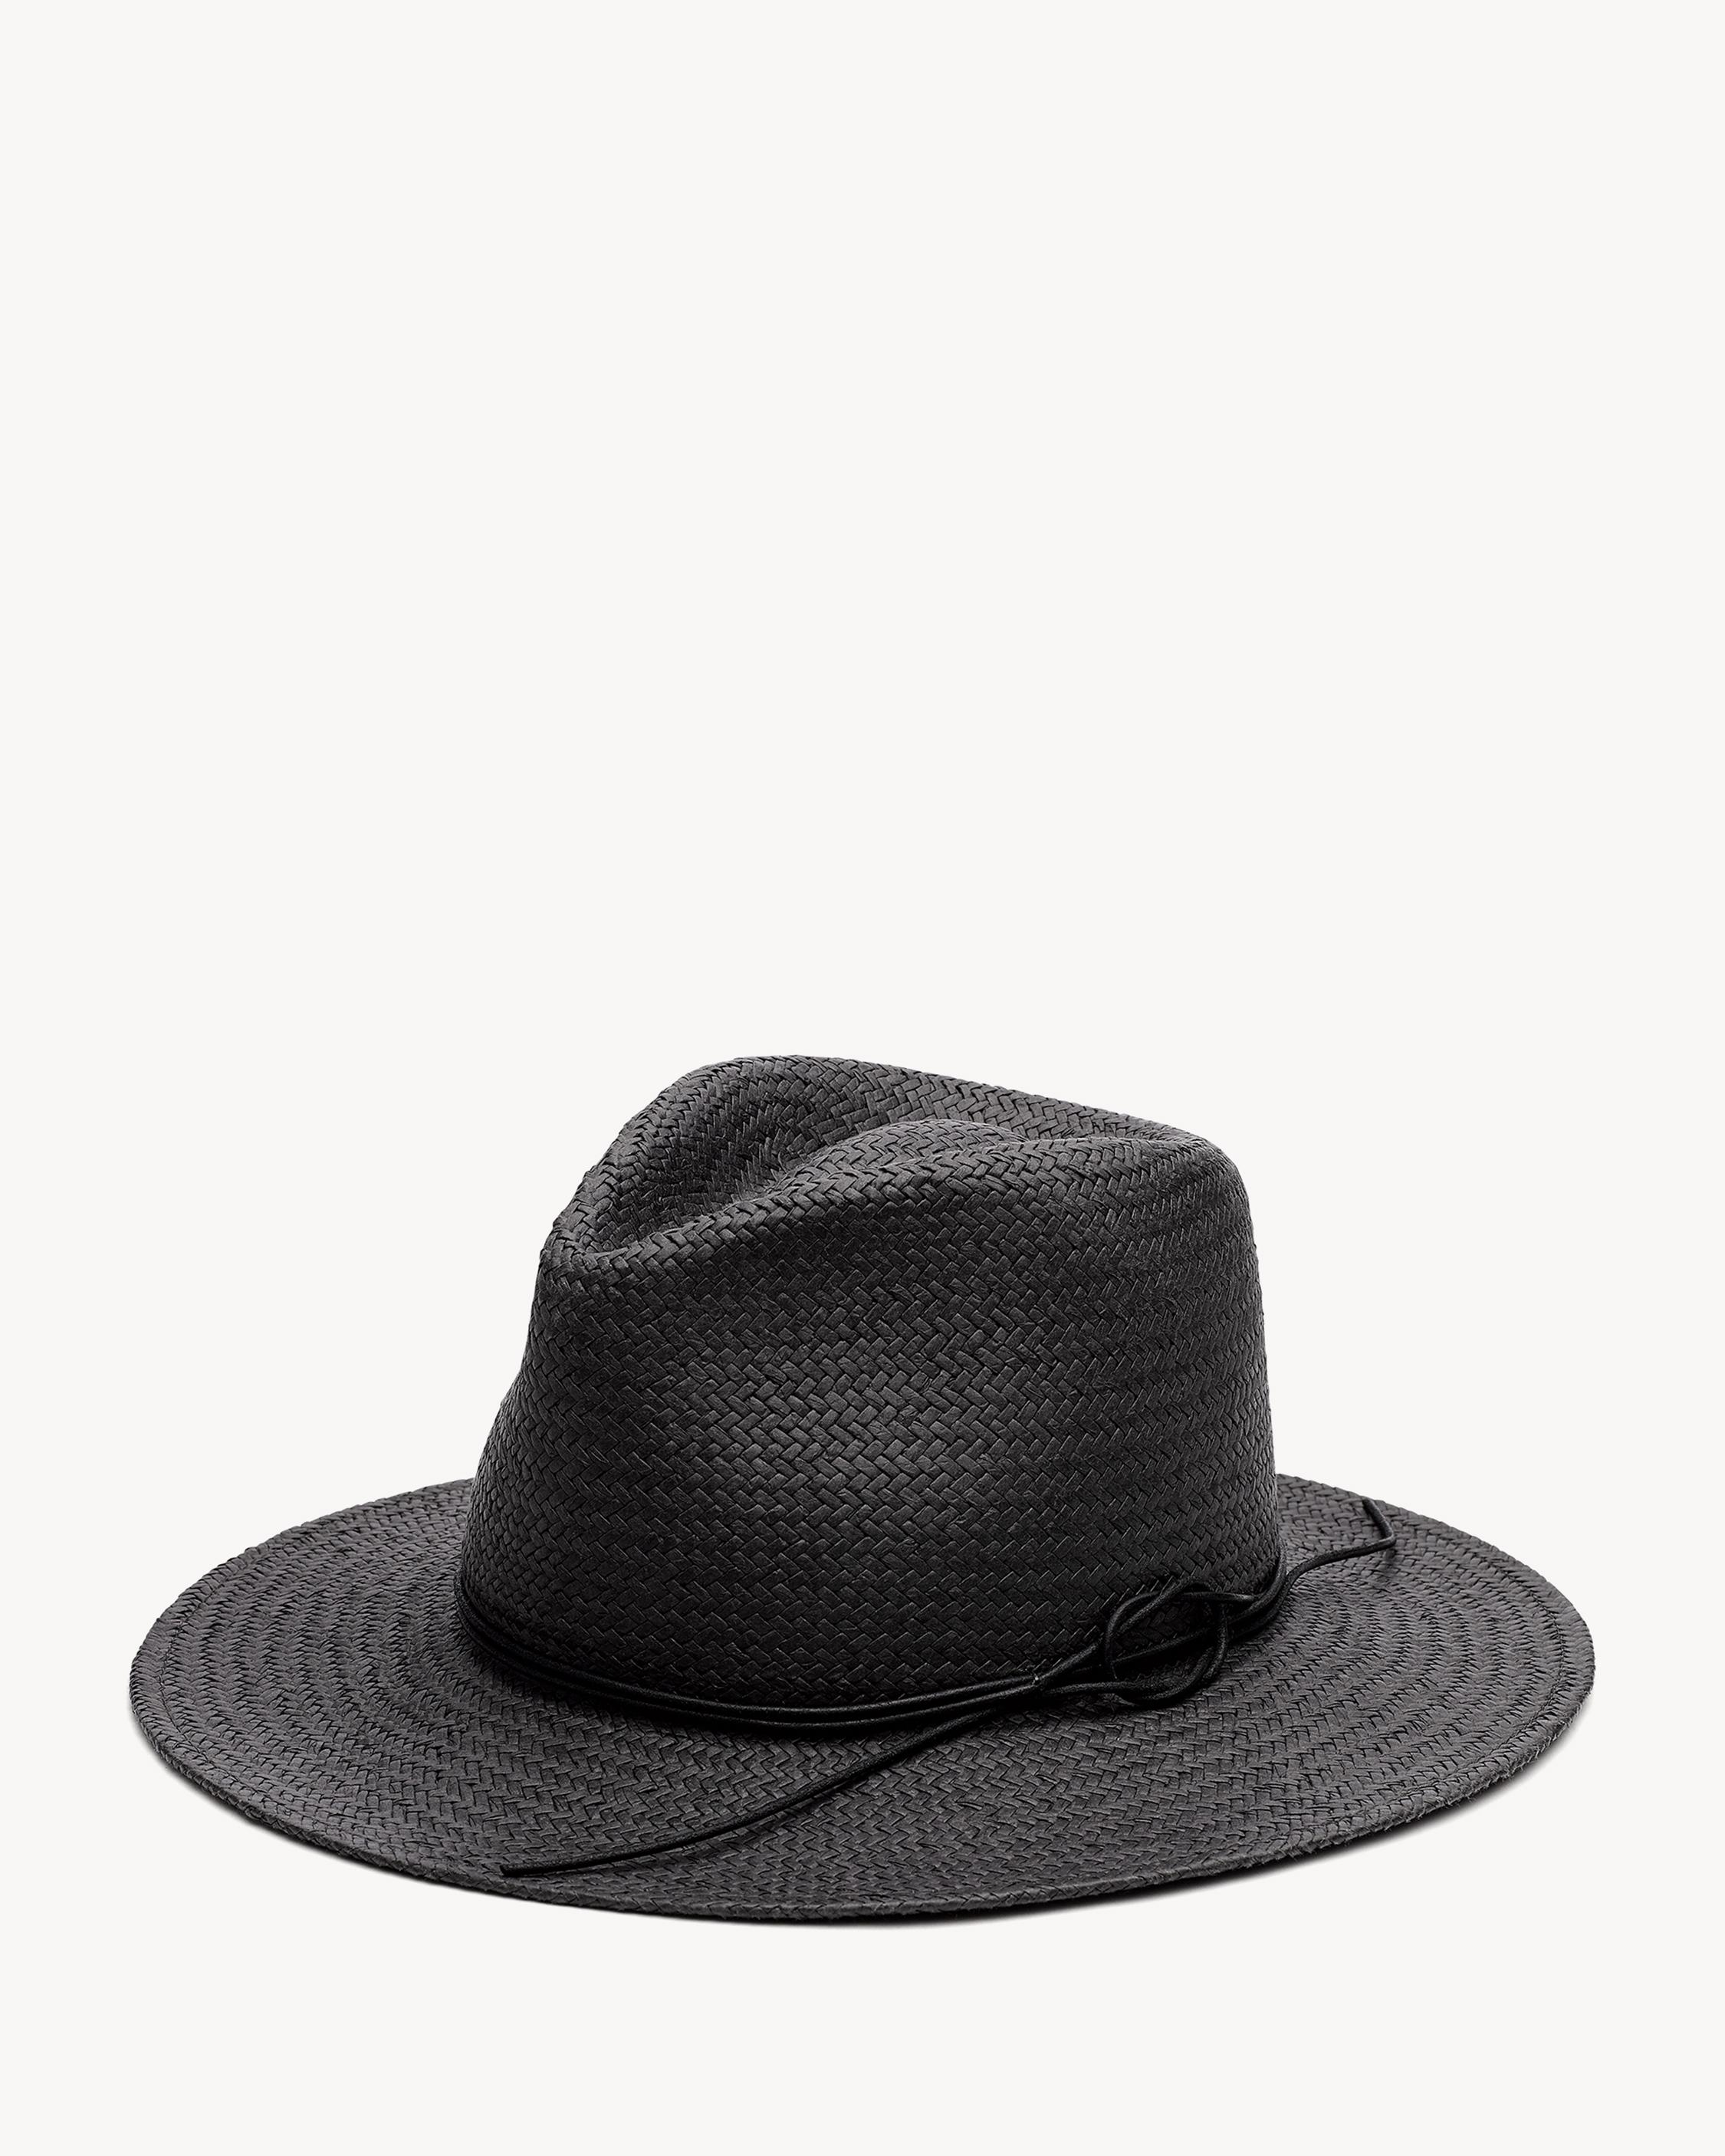 Fedoras & Hats in Suede, Leather & Cashmere with Urban Style | rag & bone